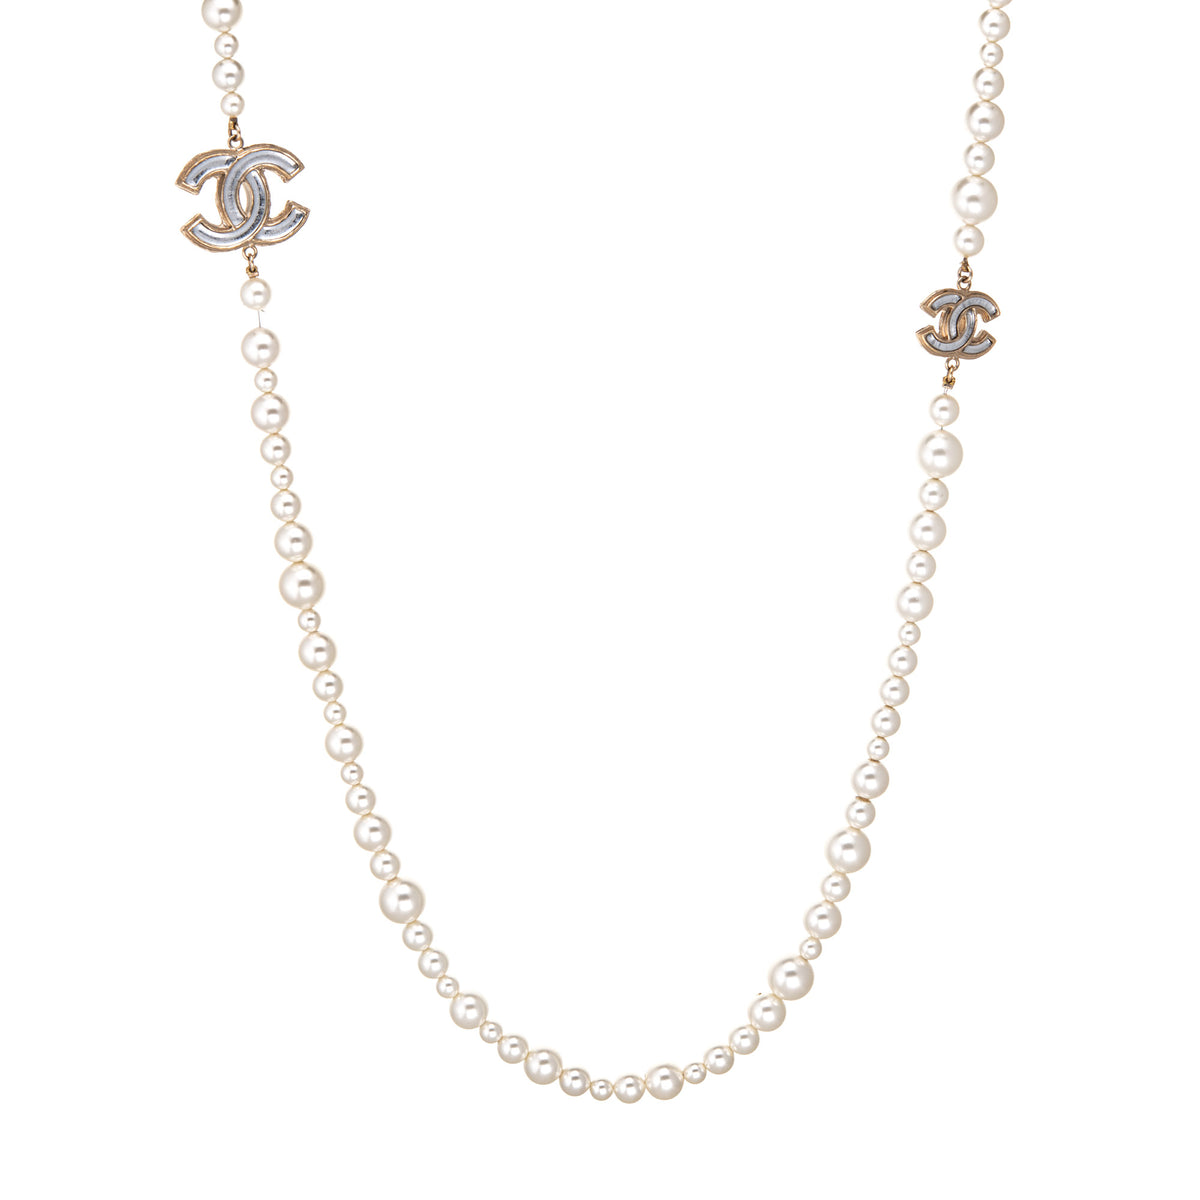 chanel pearl charm necklace gold